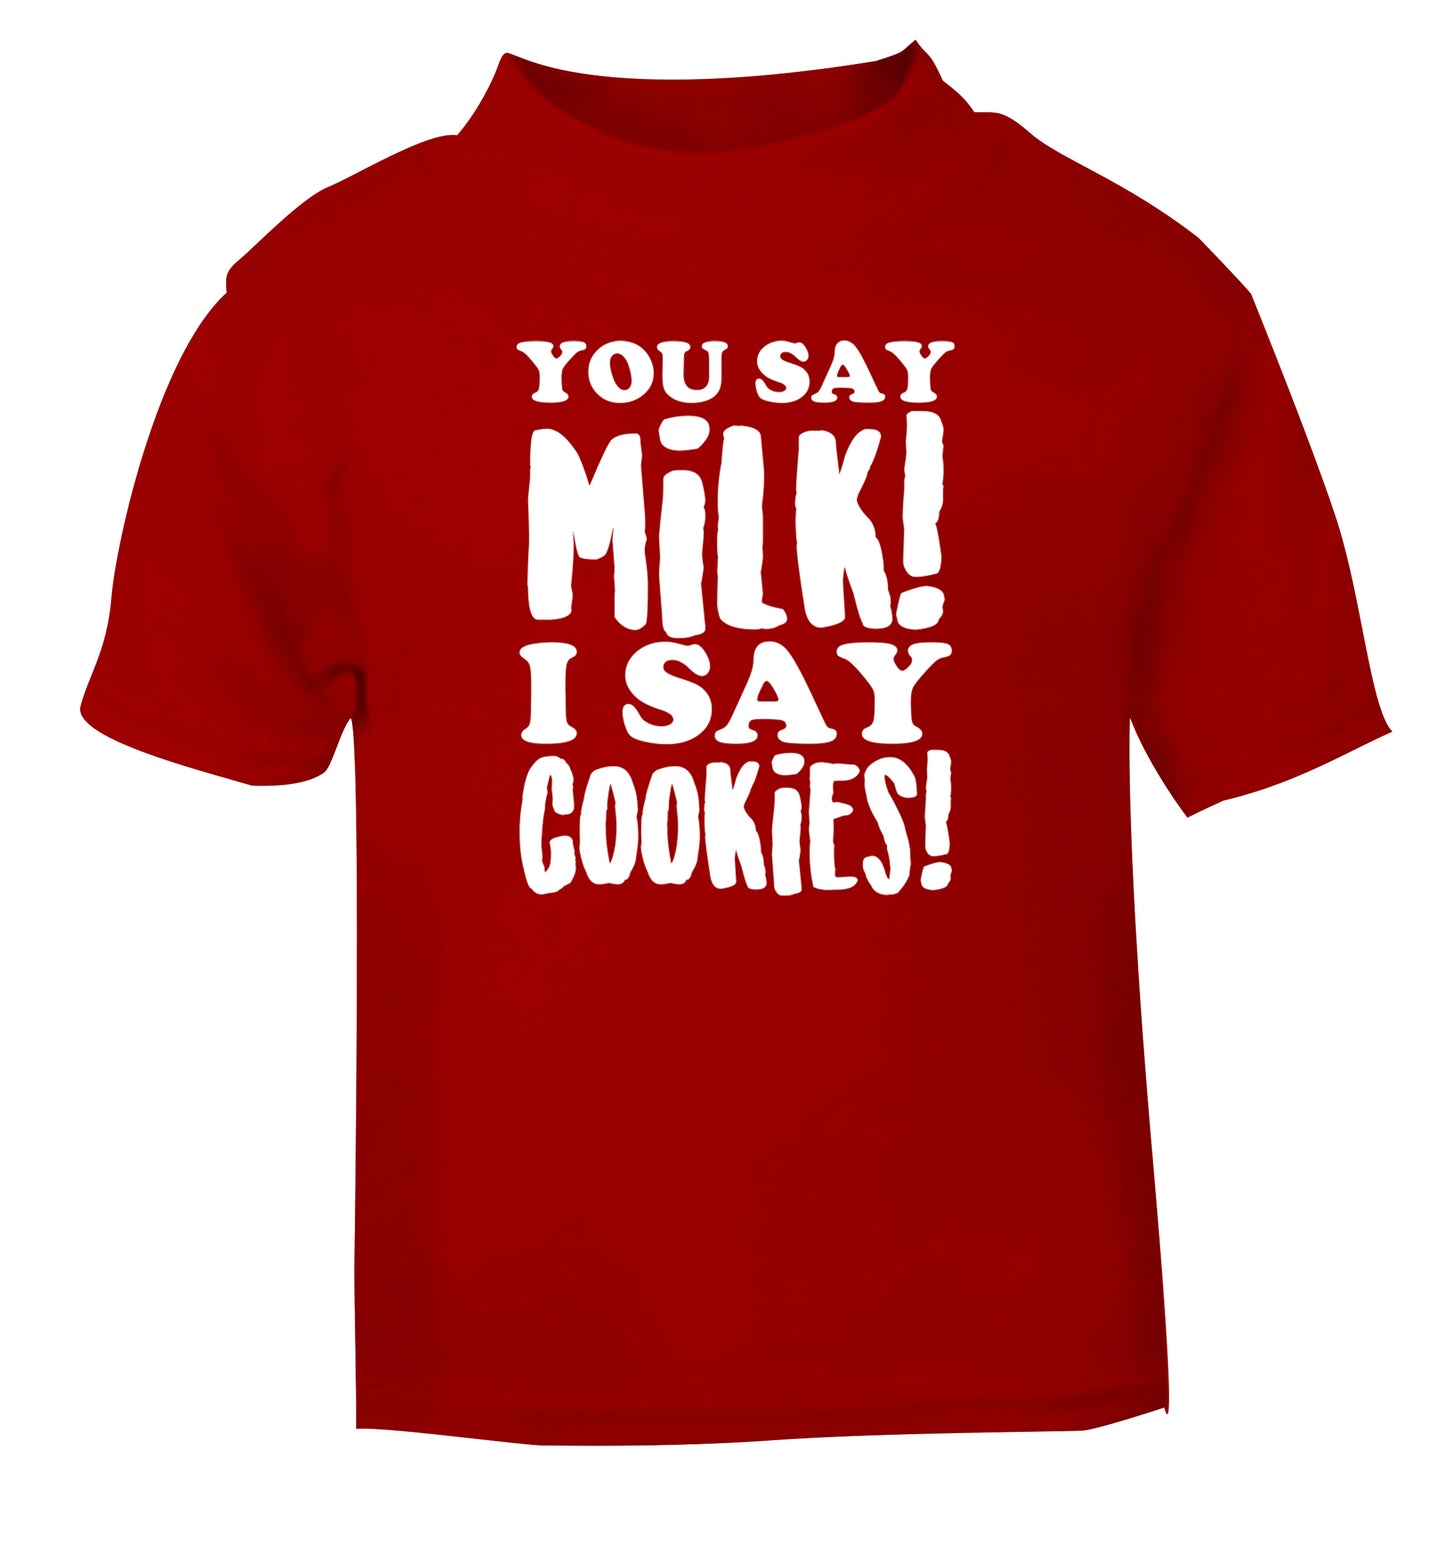 You say milk I say cookies! red Baby Toddler Tshirt 2 Years